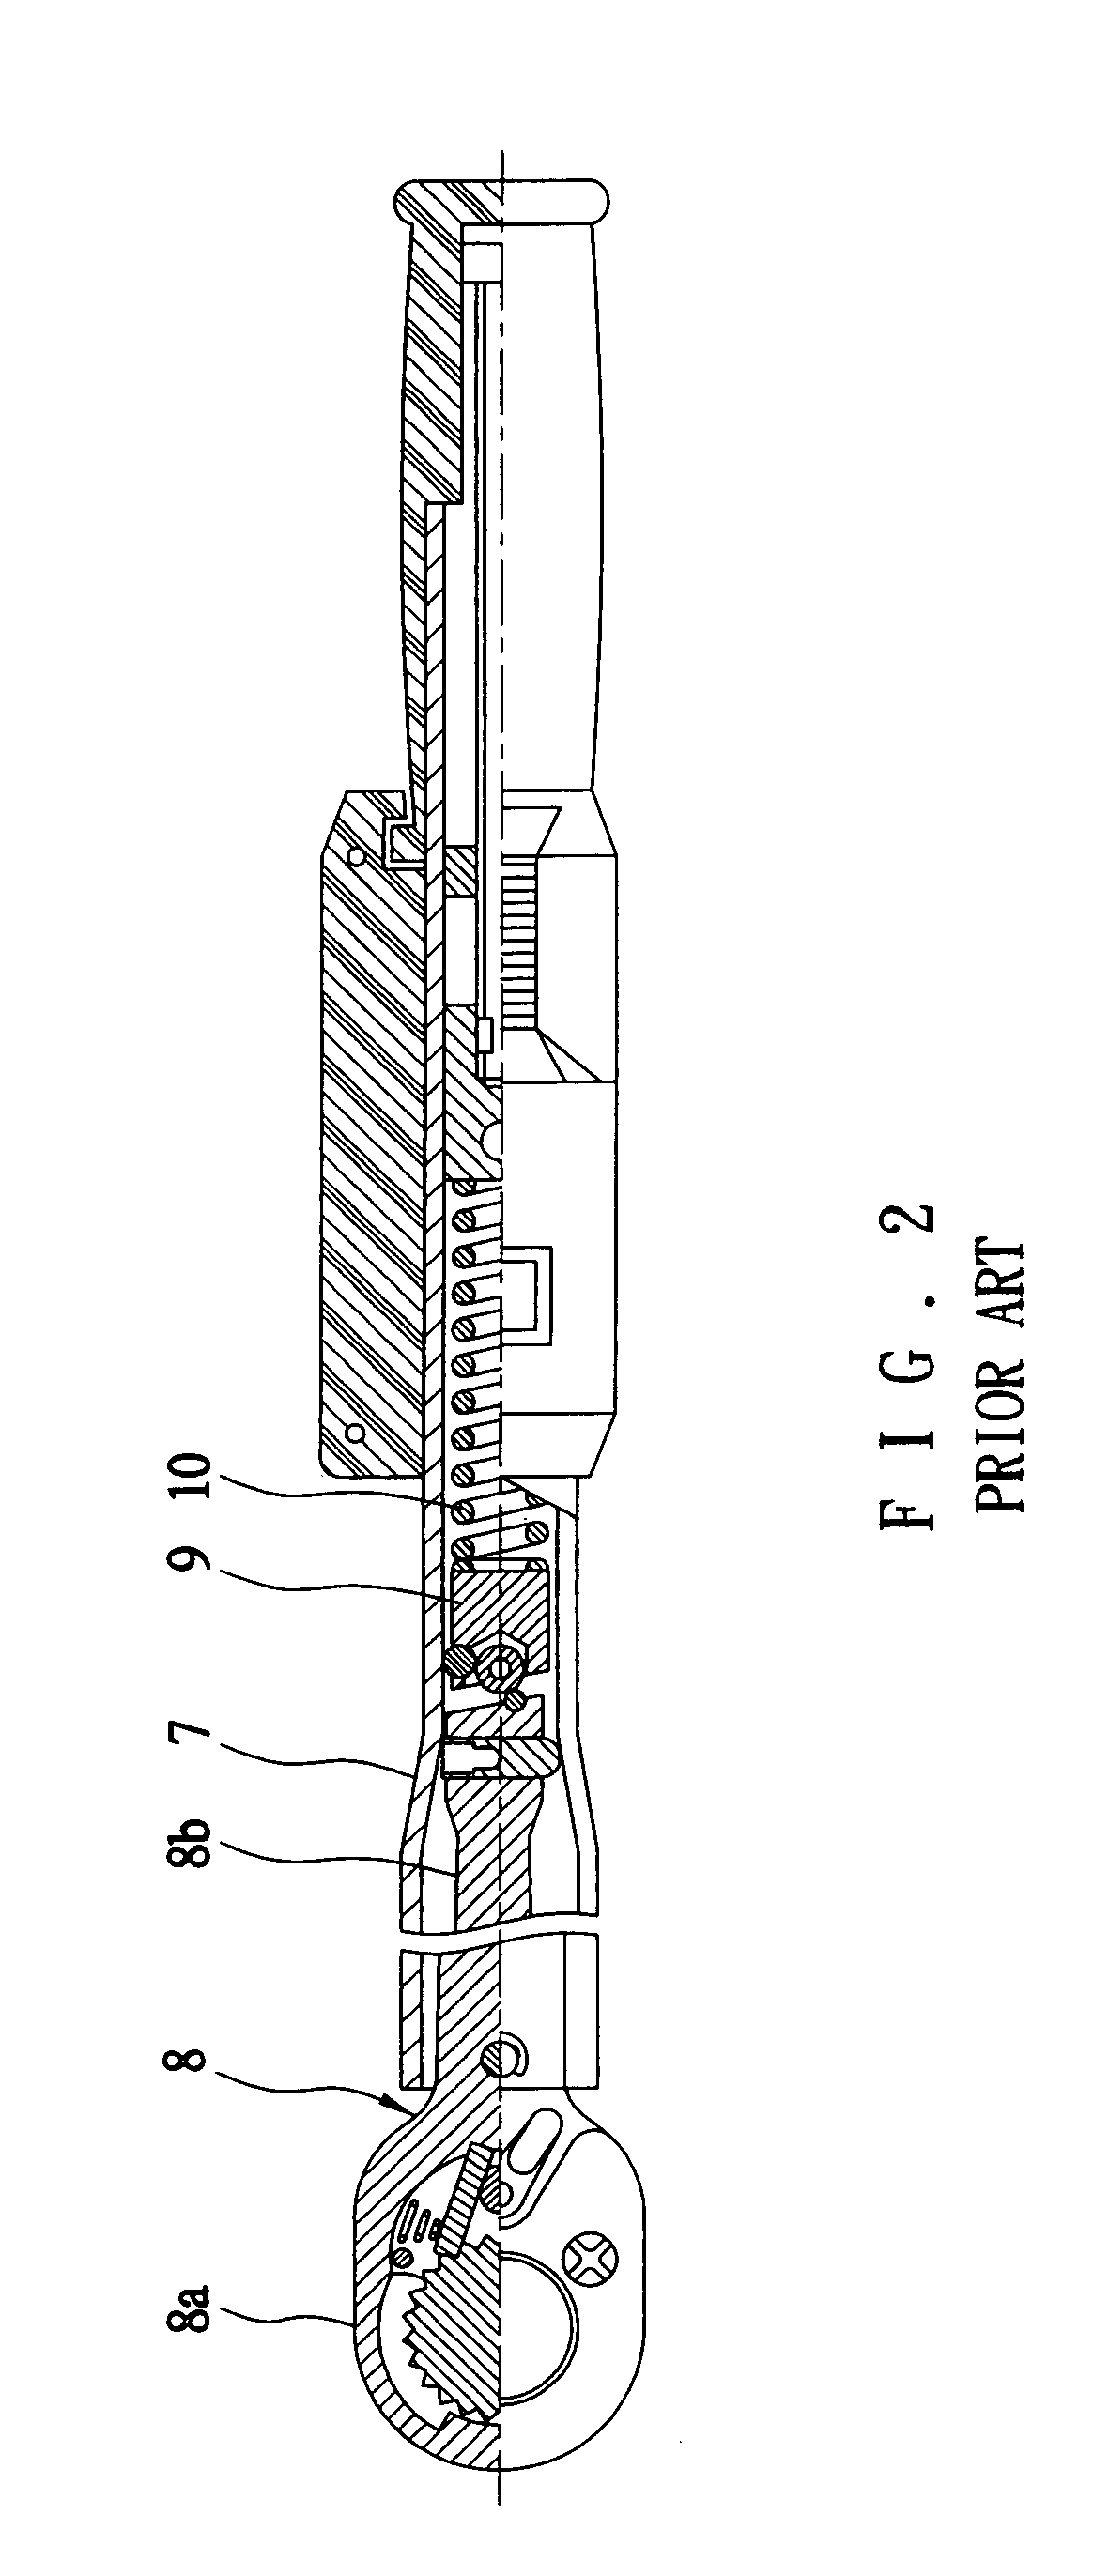 Device for numerically displaying torque of torque wrench having a preset maximum torque